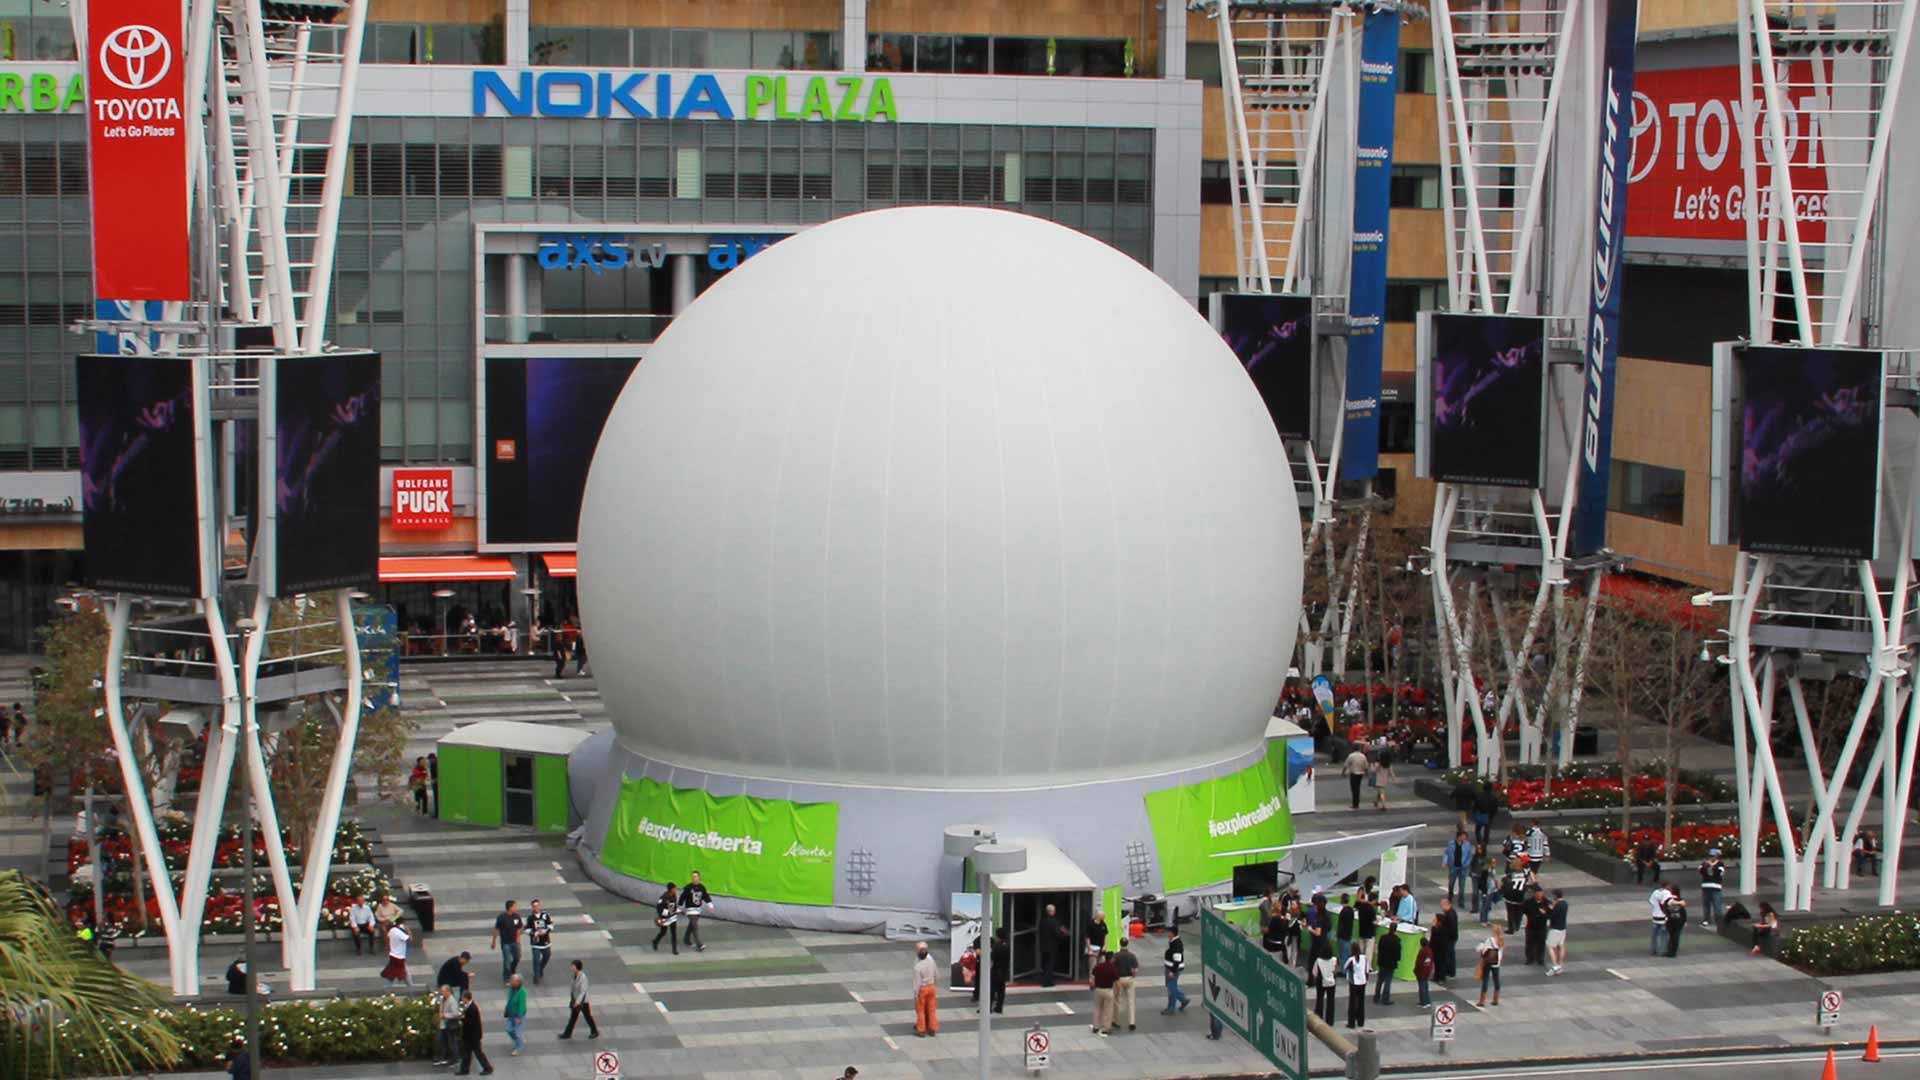 Dome building in Nokia Plaza